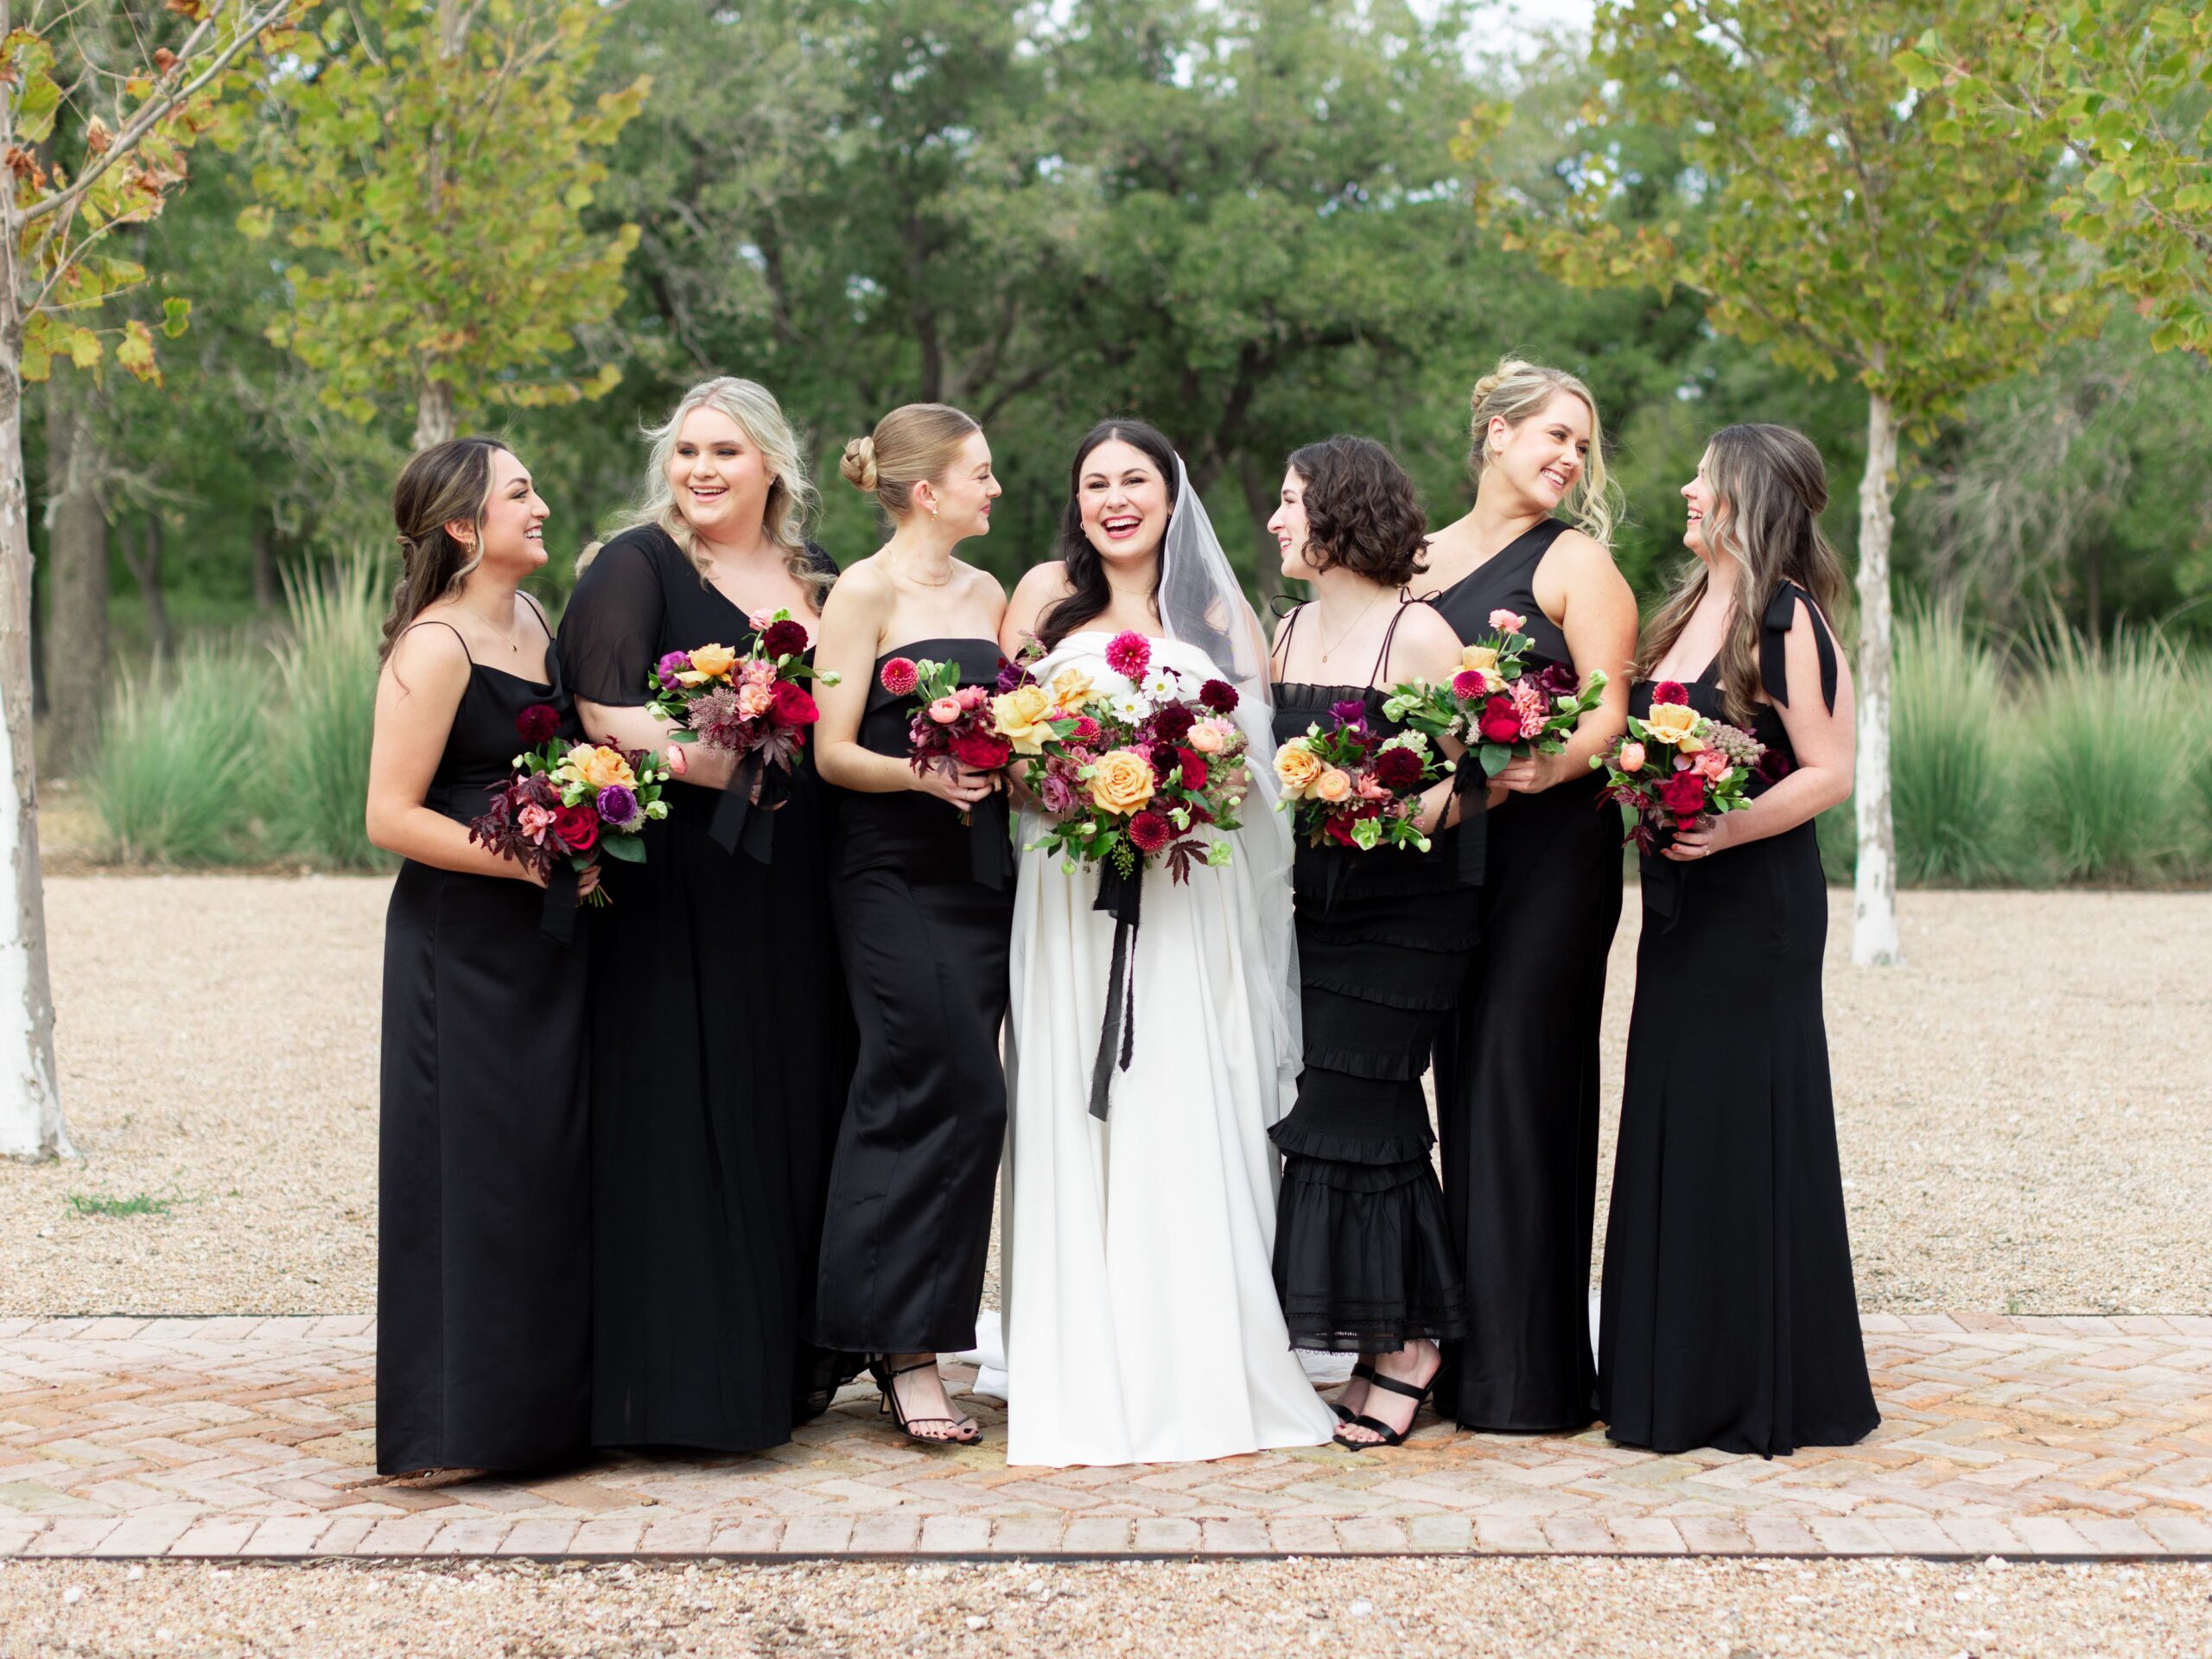 Bride with bridesmaids in mismatched black gowns with plum bouquets